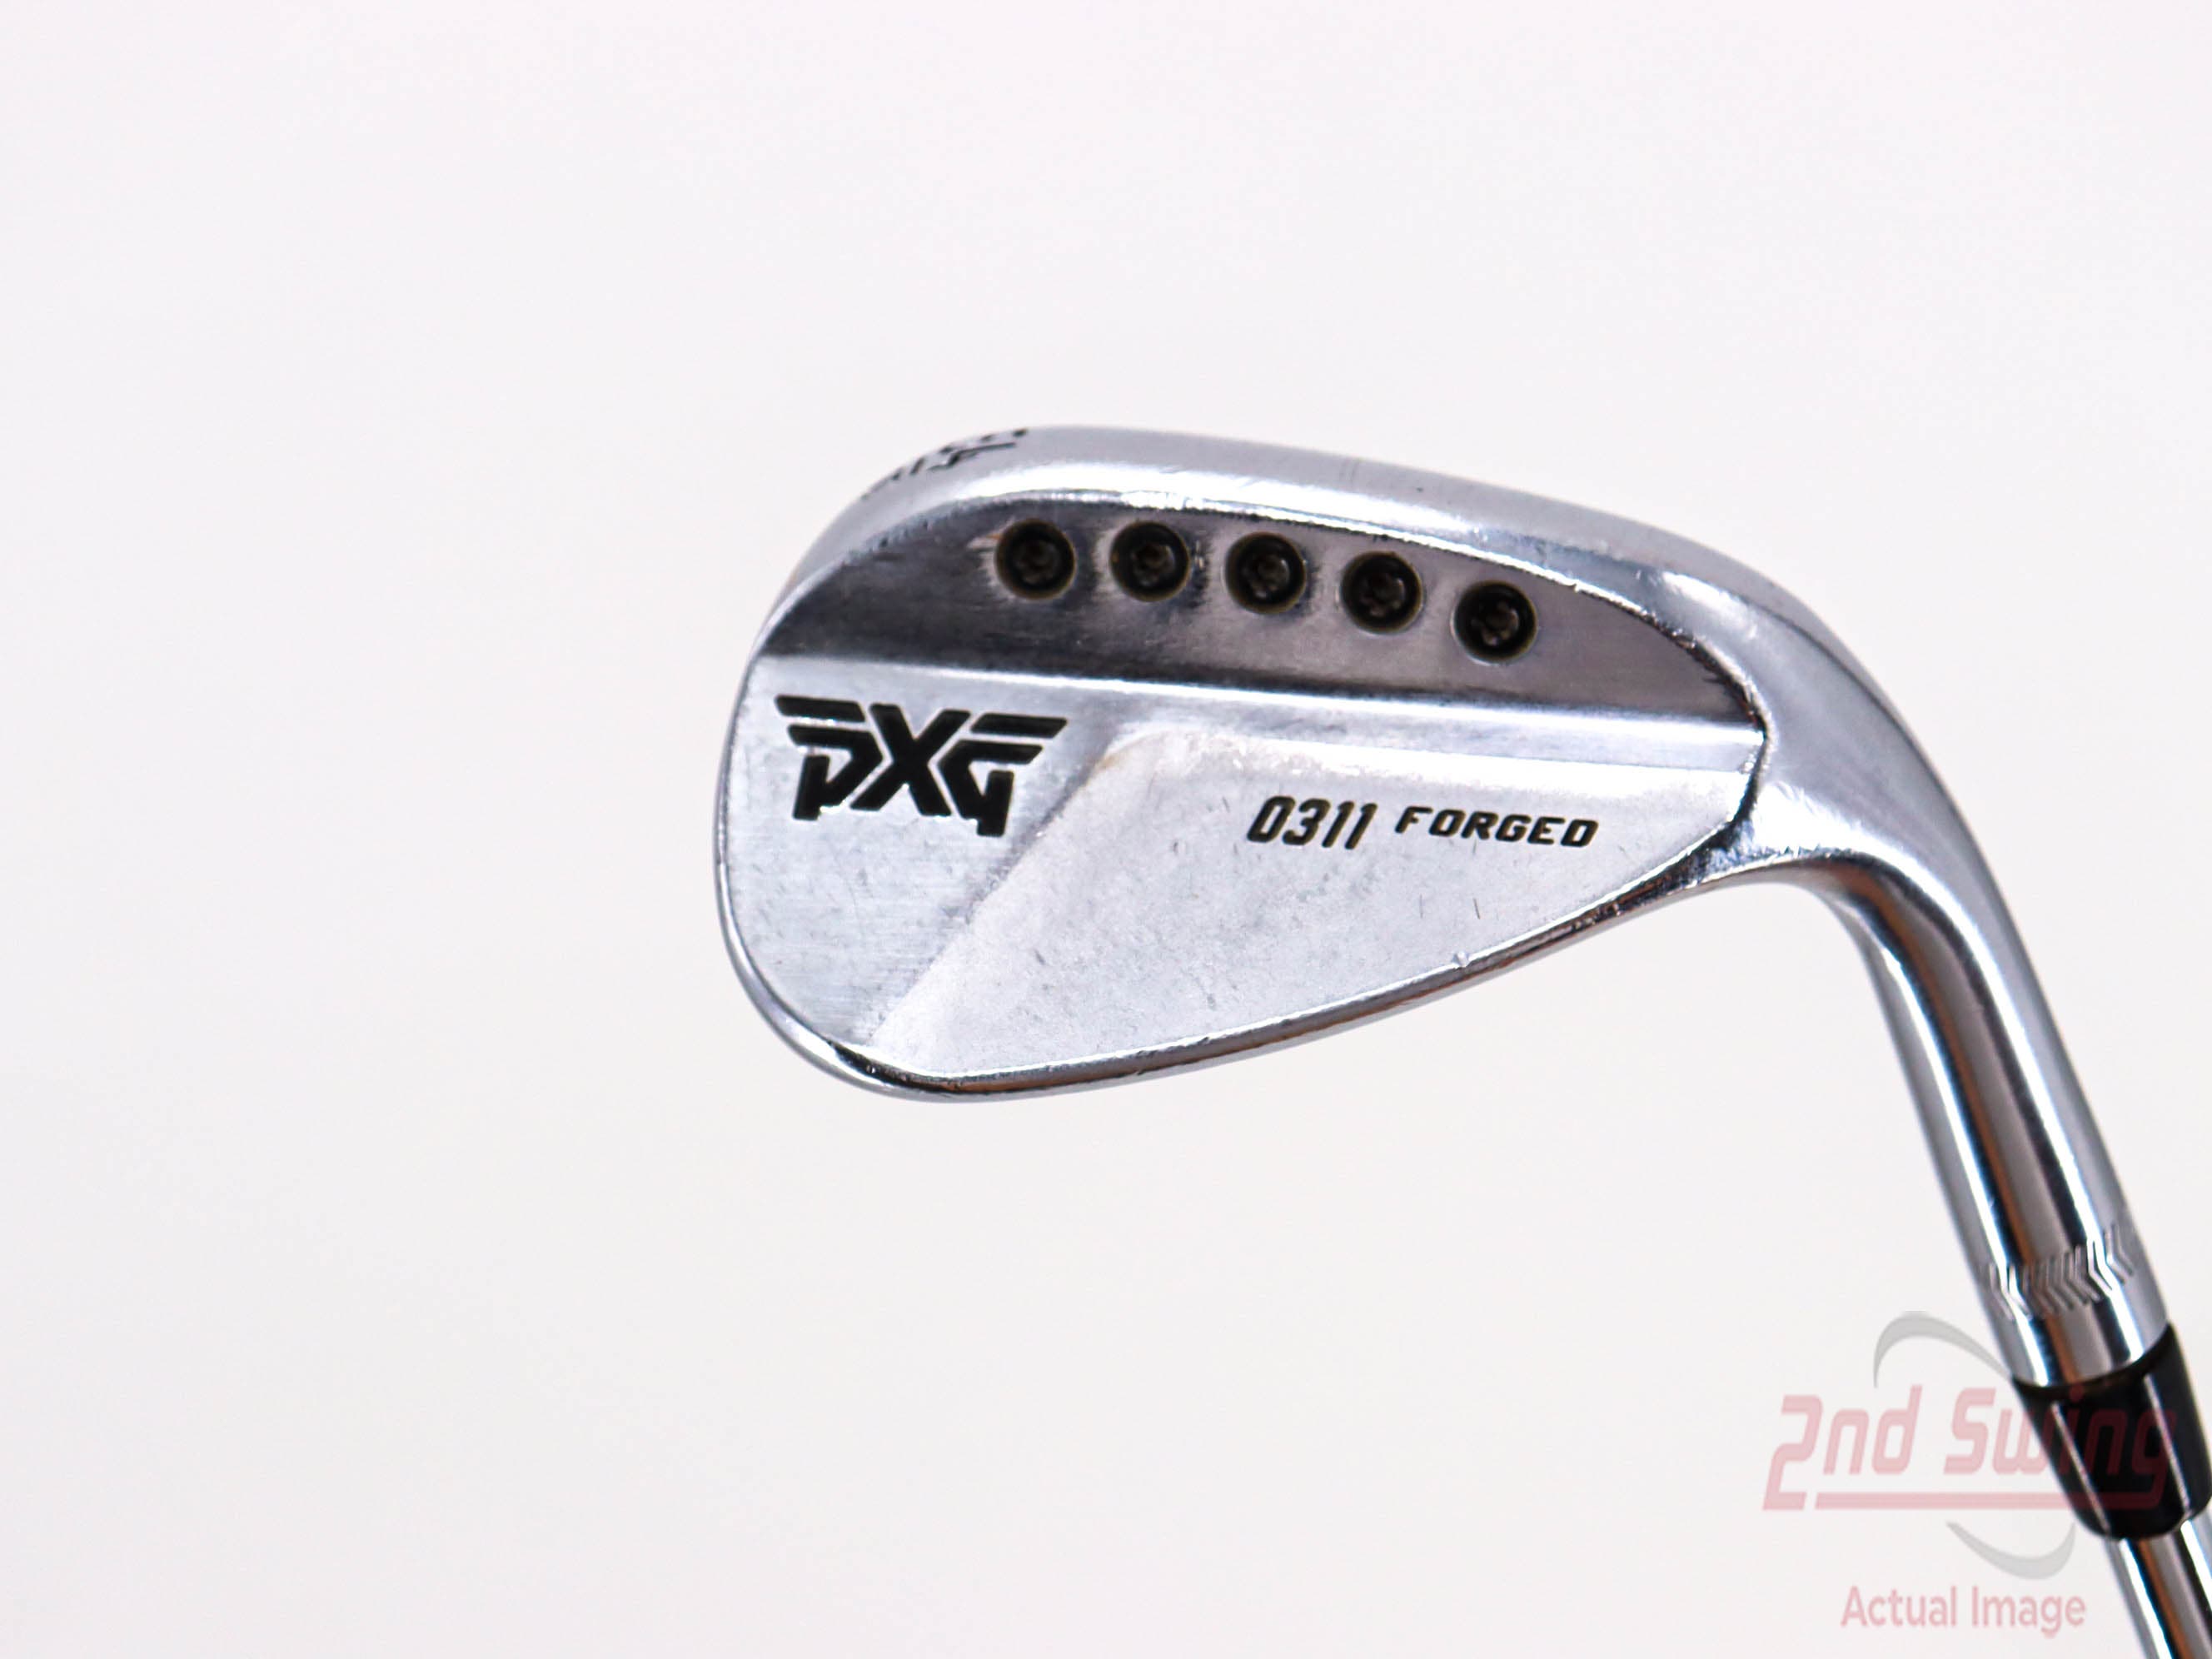 PXG 0311 Forged Chrome Wedge | 2nd Swing Golf